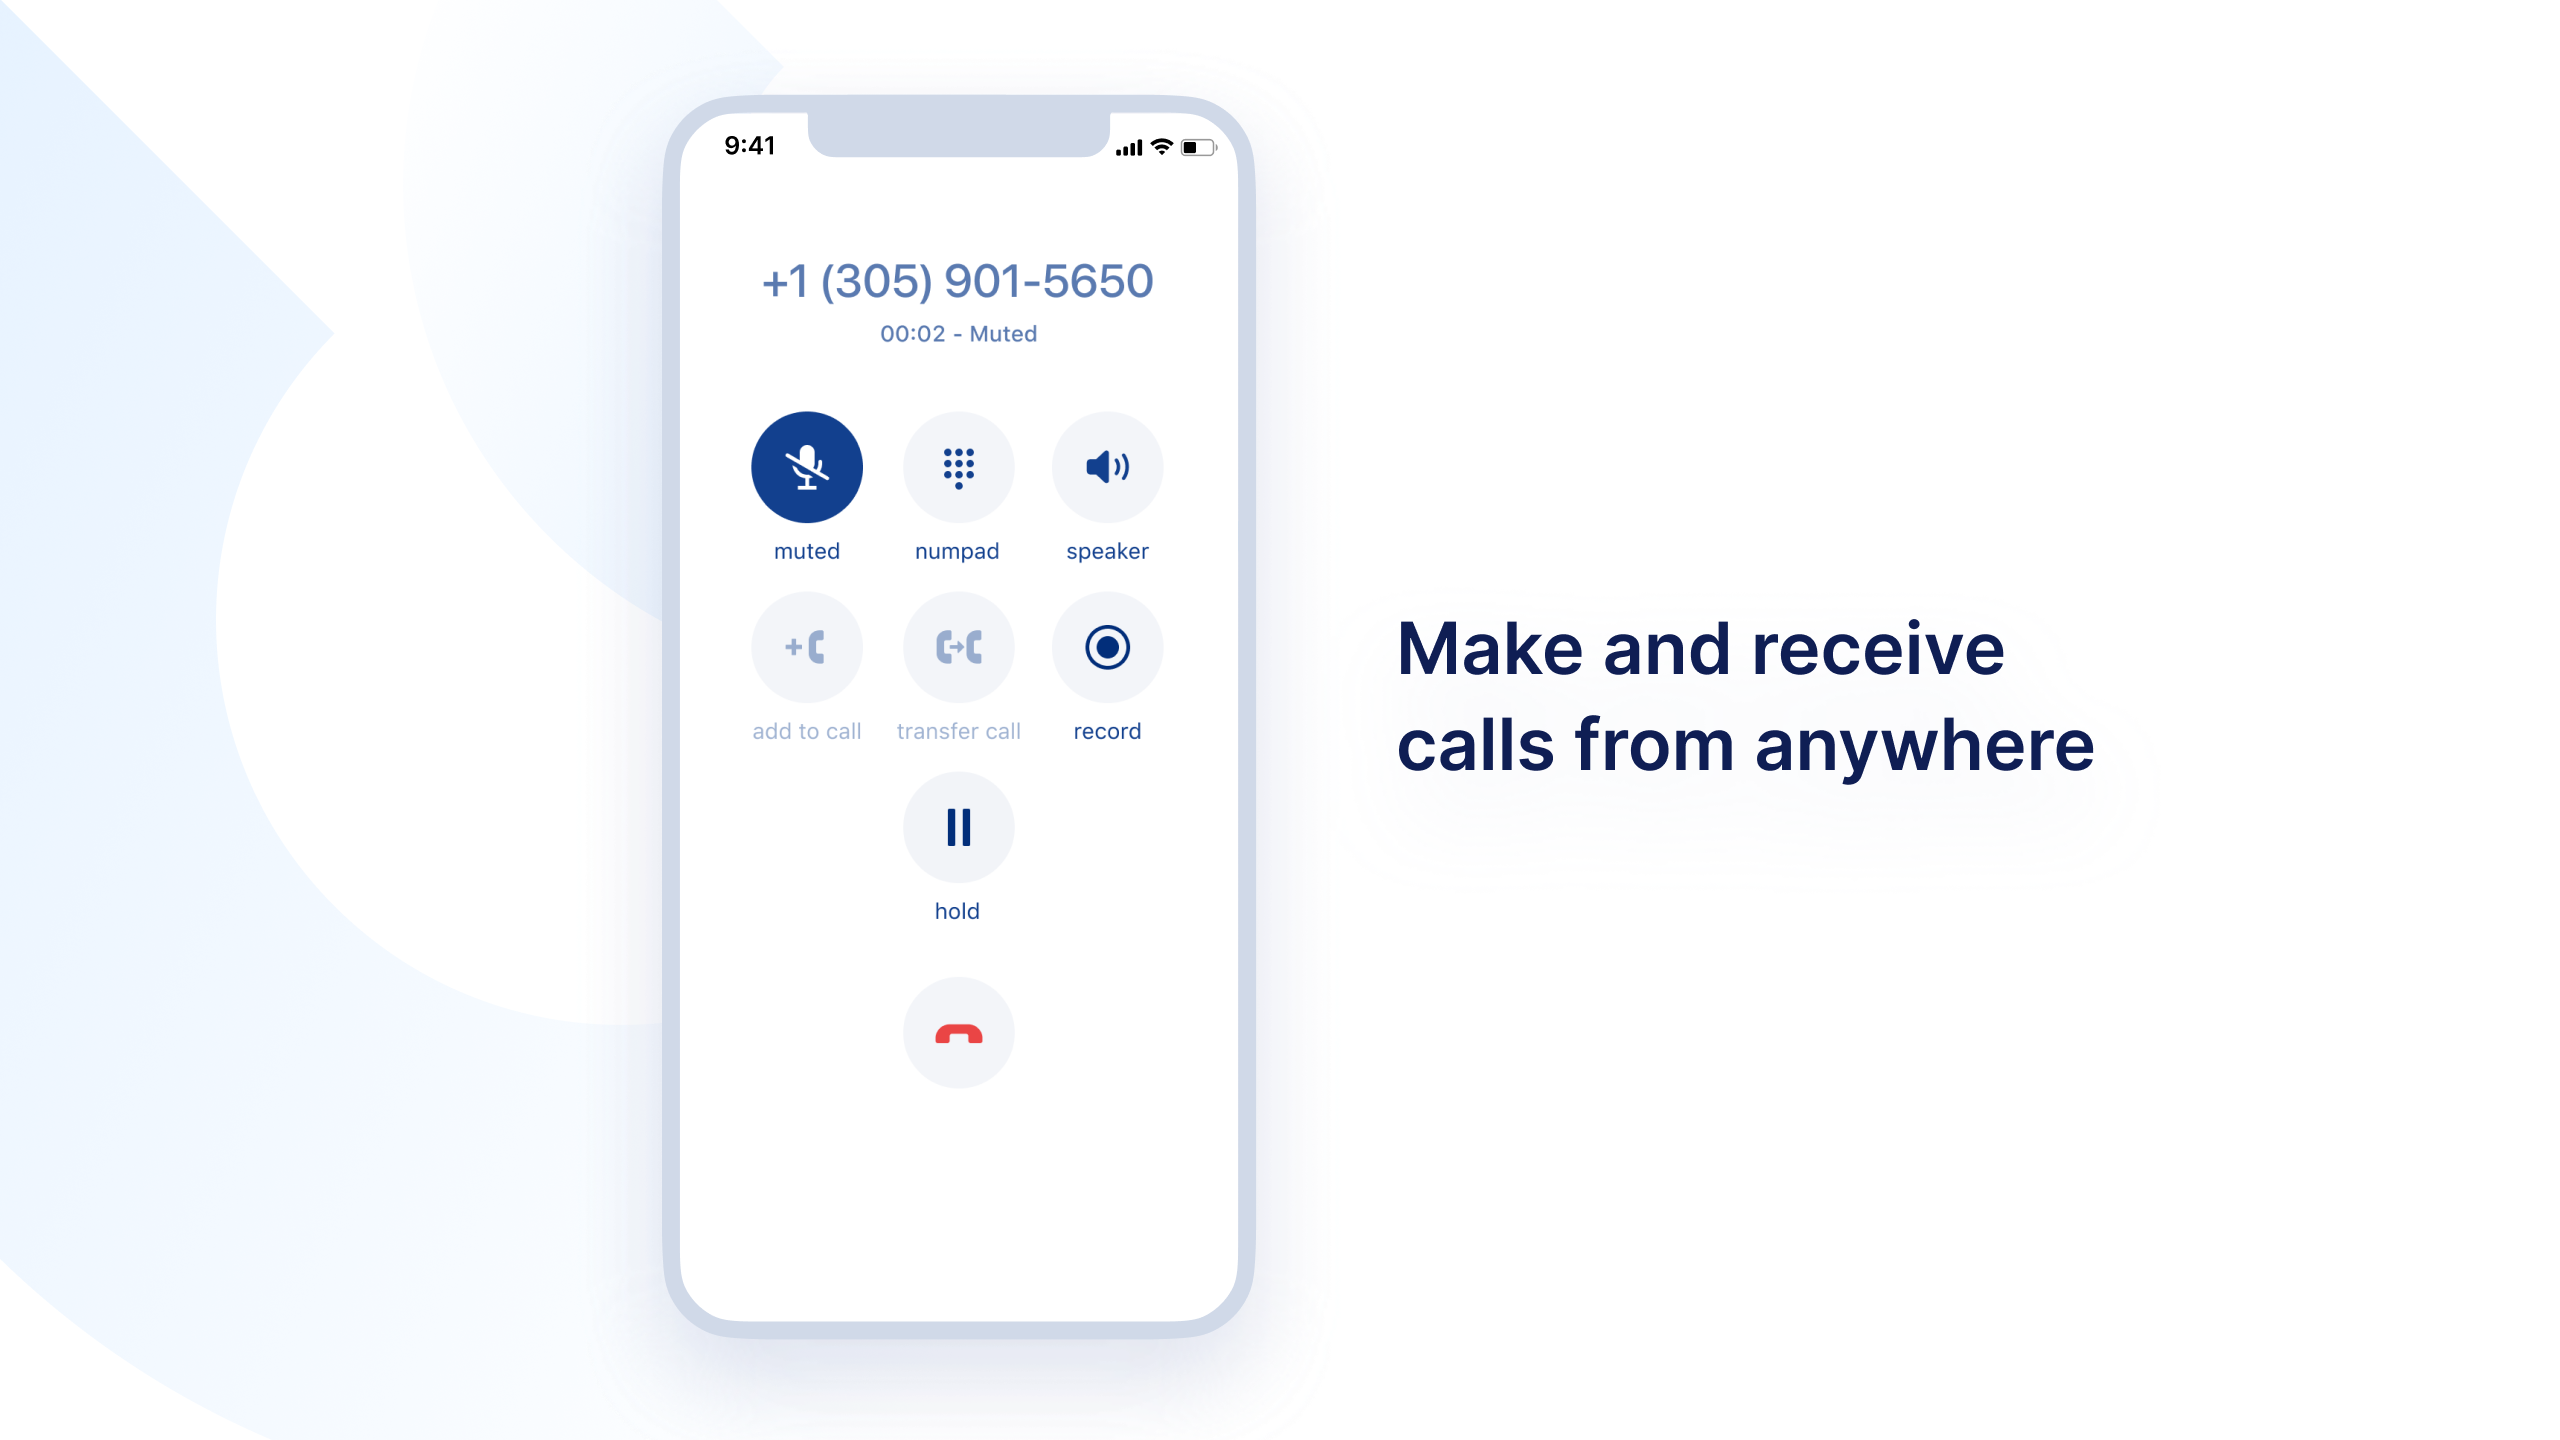 Make and receive calls from anywhere